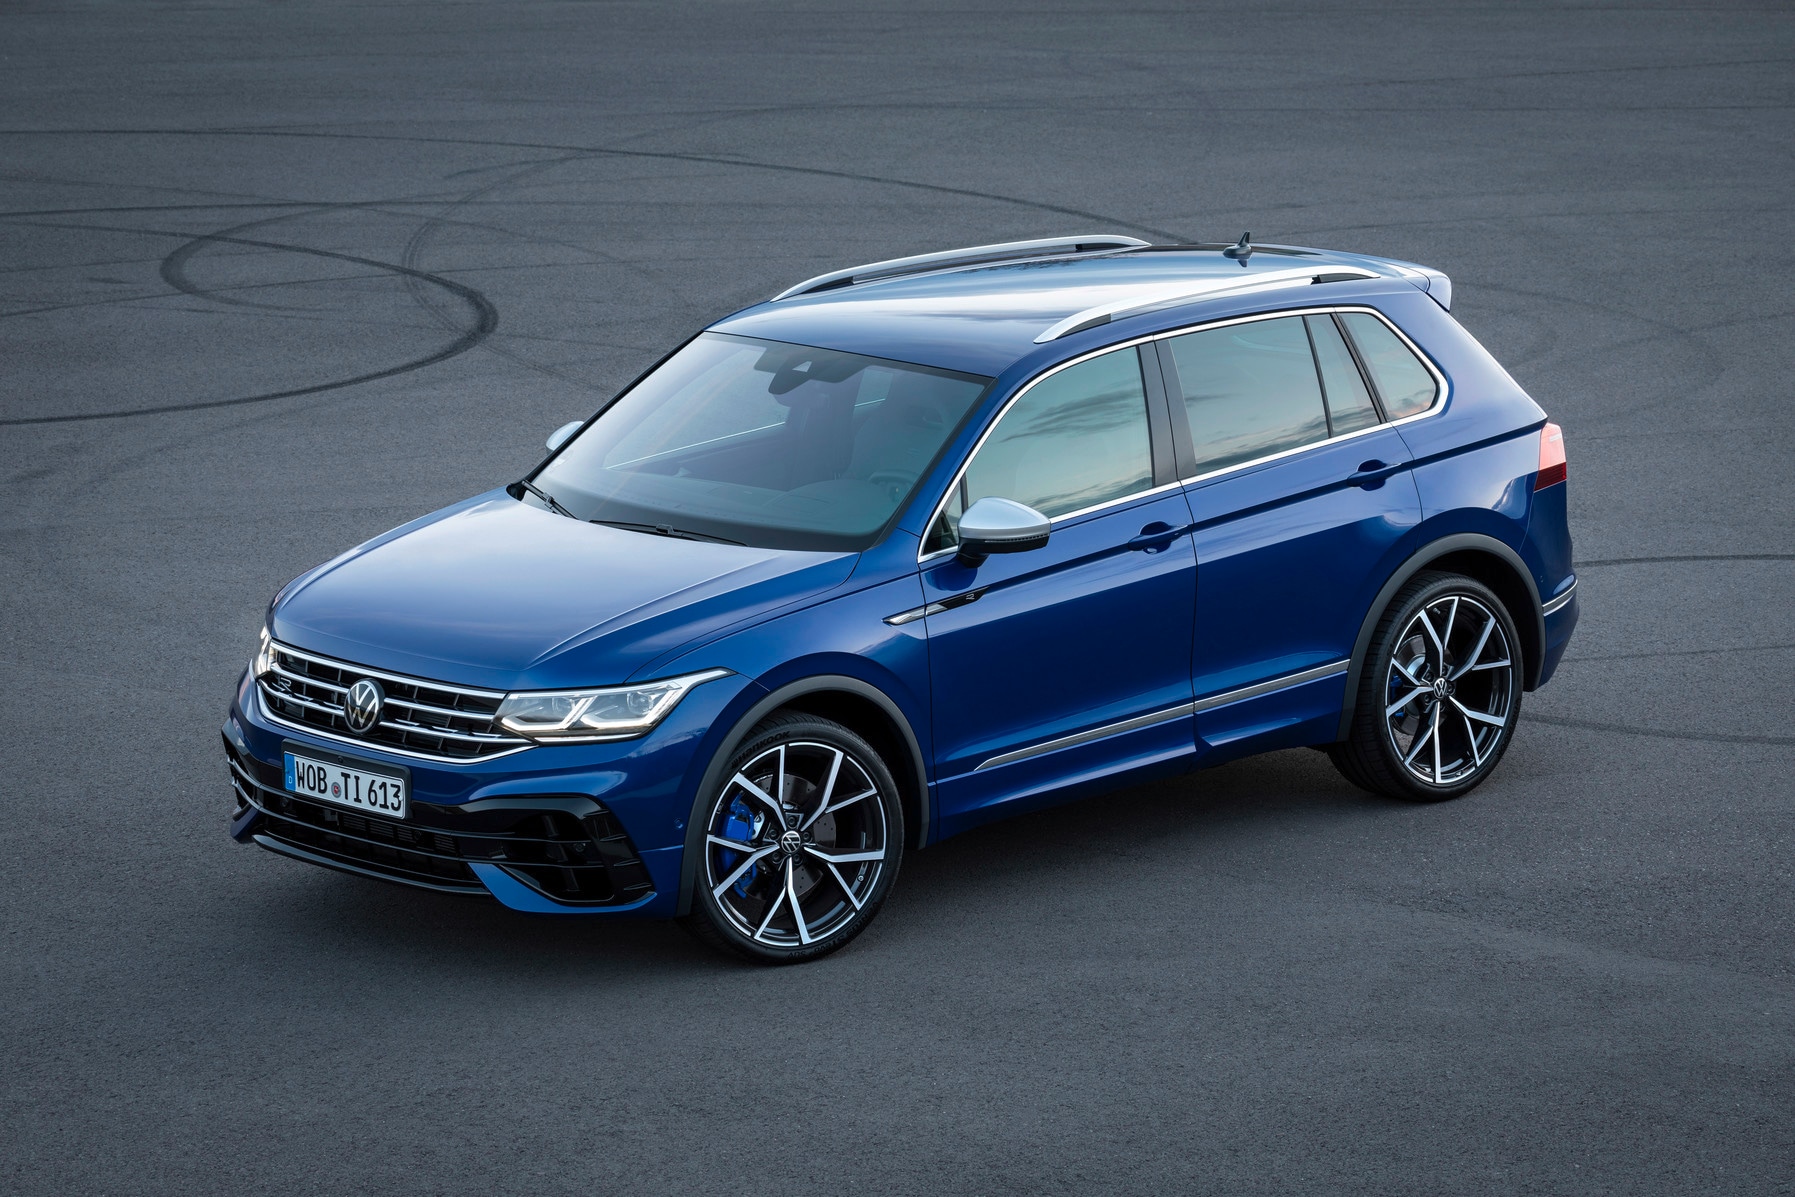 2021 Volkswagen Tiguan R, the most powerful Tiguan ever, goes on sale in Europe HT Auto